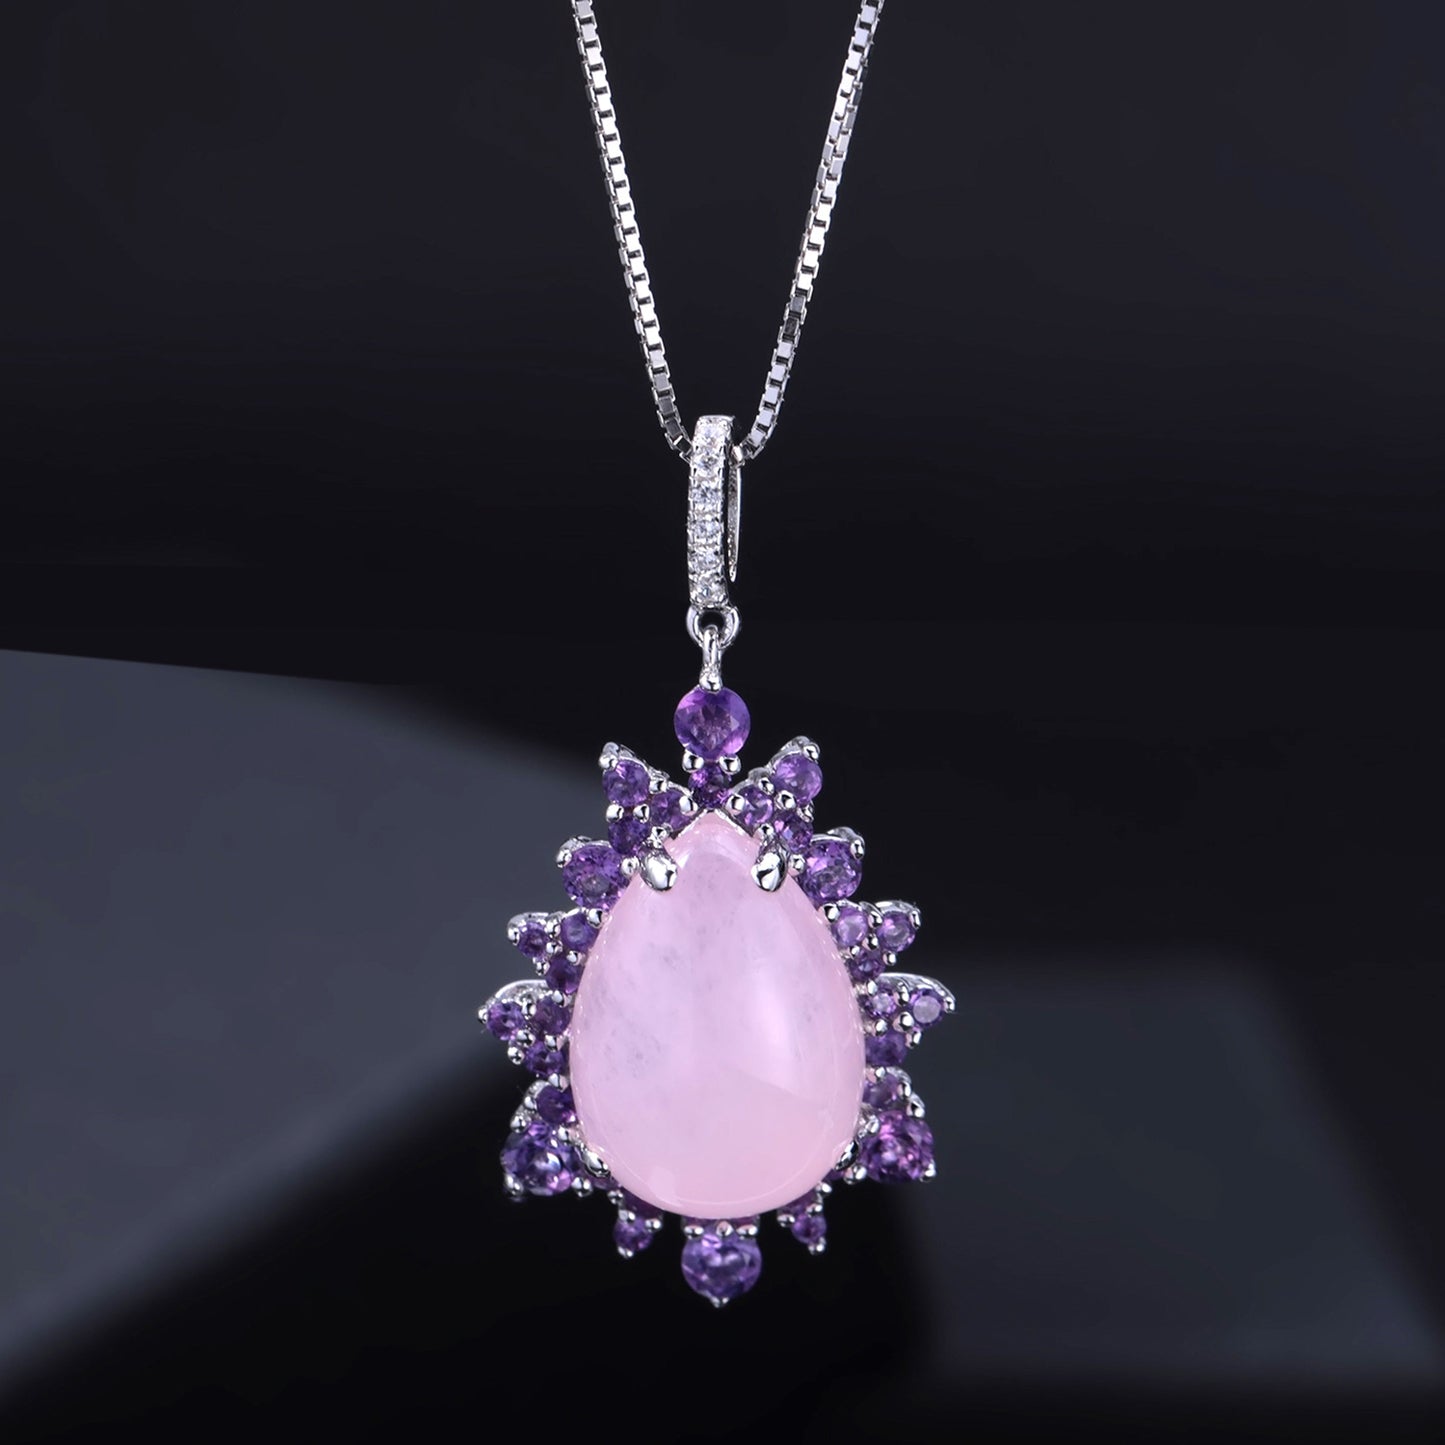 Luxury Natural Pink Chalcedony Pendant Silver Necklace for Women